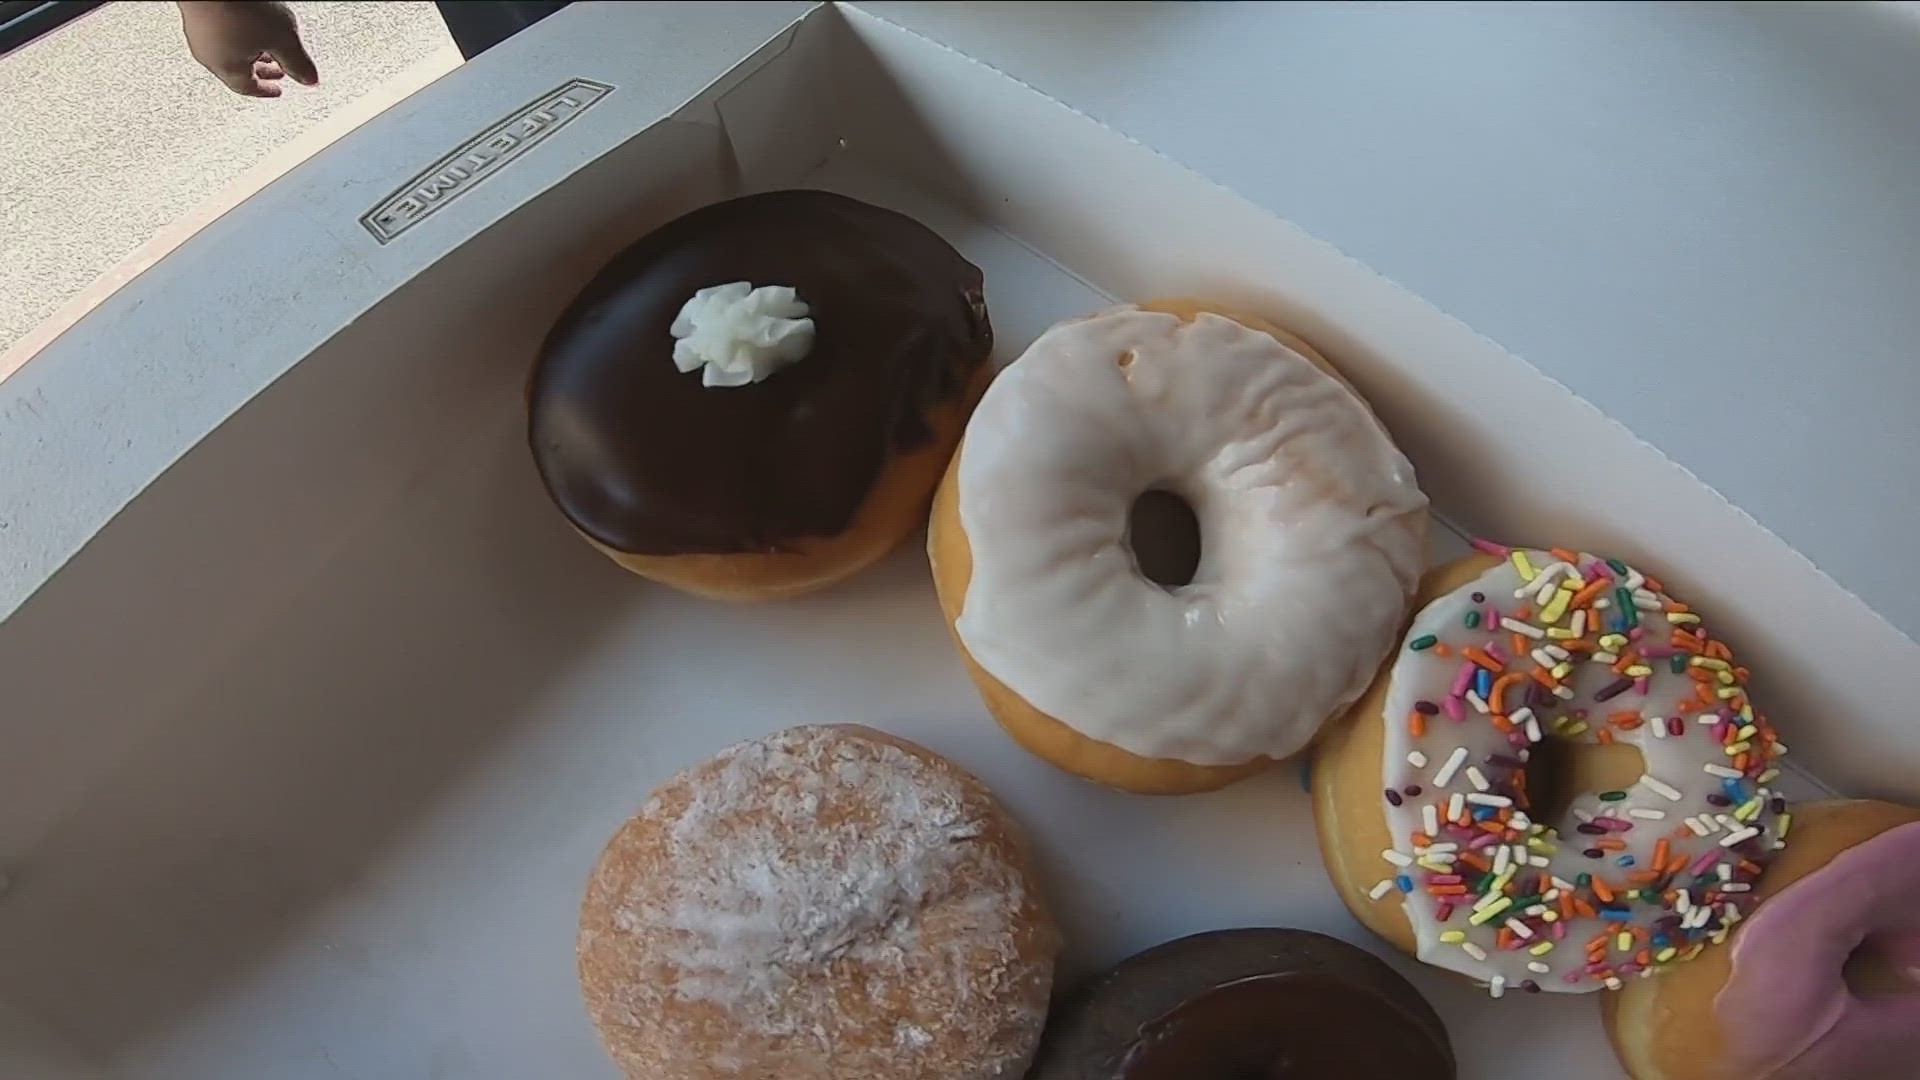 The Salvation Army hands out free donuts to local veterans